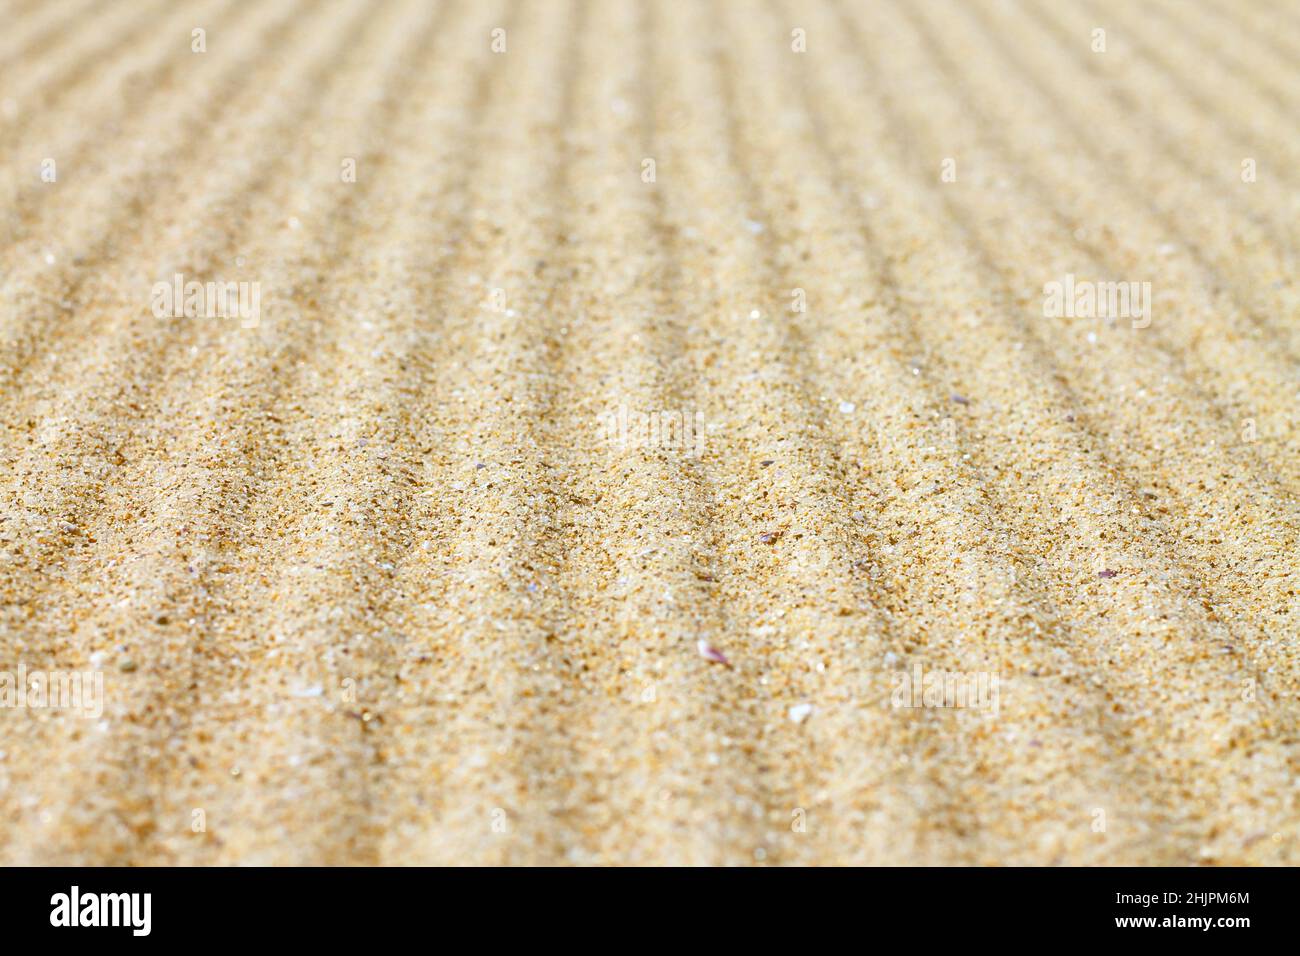 Rippled sand texture for background. Stock Photo